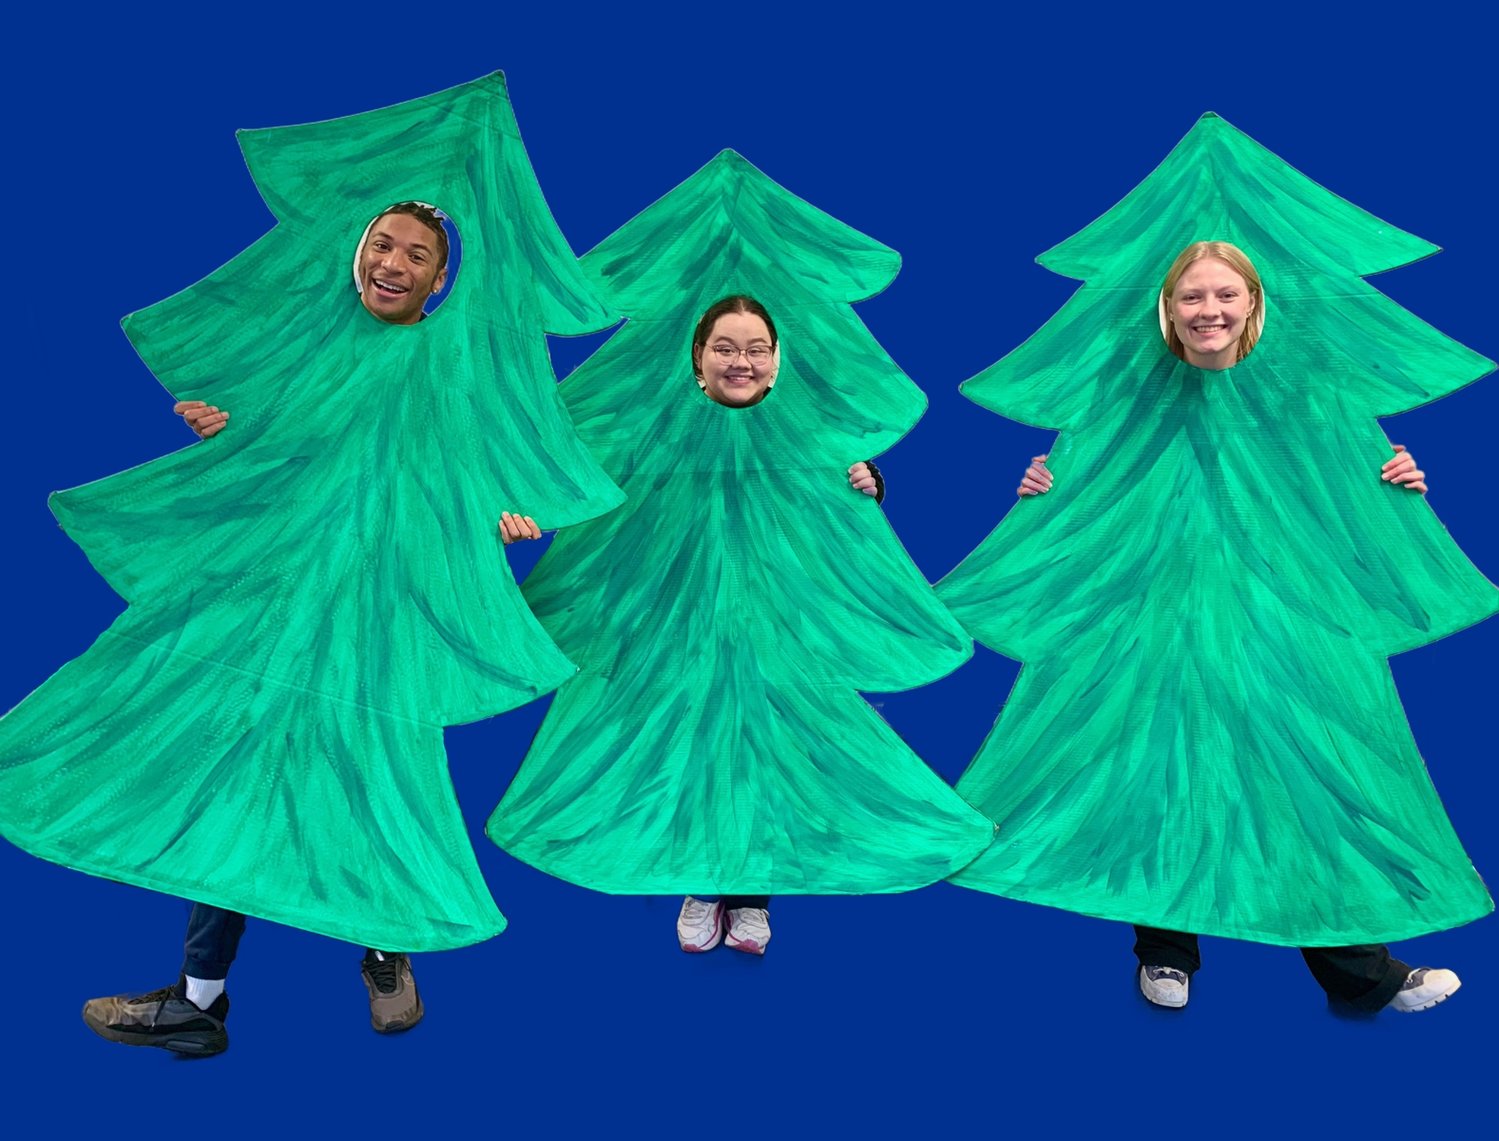 Members of the Paper Bag Players cast in tree costumes.